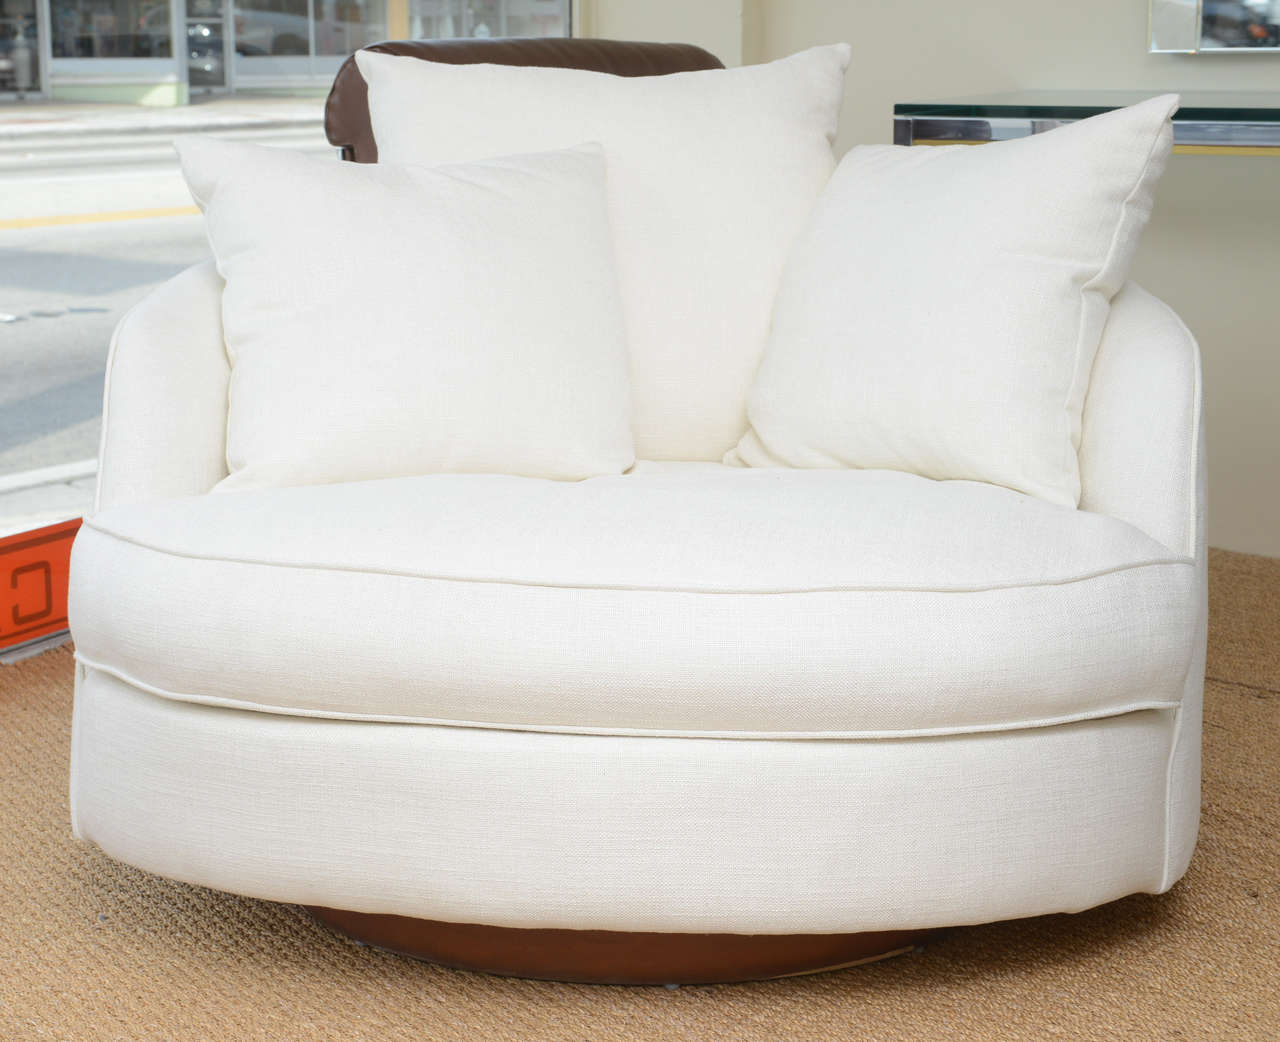 Milo Baughman MOD-style swivel round lounge chair on a wood platform round base. Newly upholstered in an off white linen textile with three lumbar pillows, also in the same textile. Two standard size, and a back pillow, larger for back support.